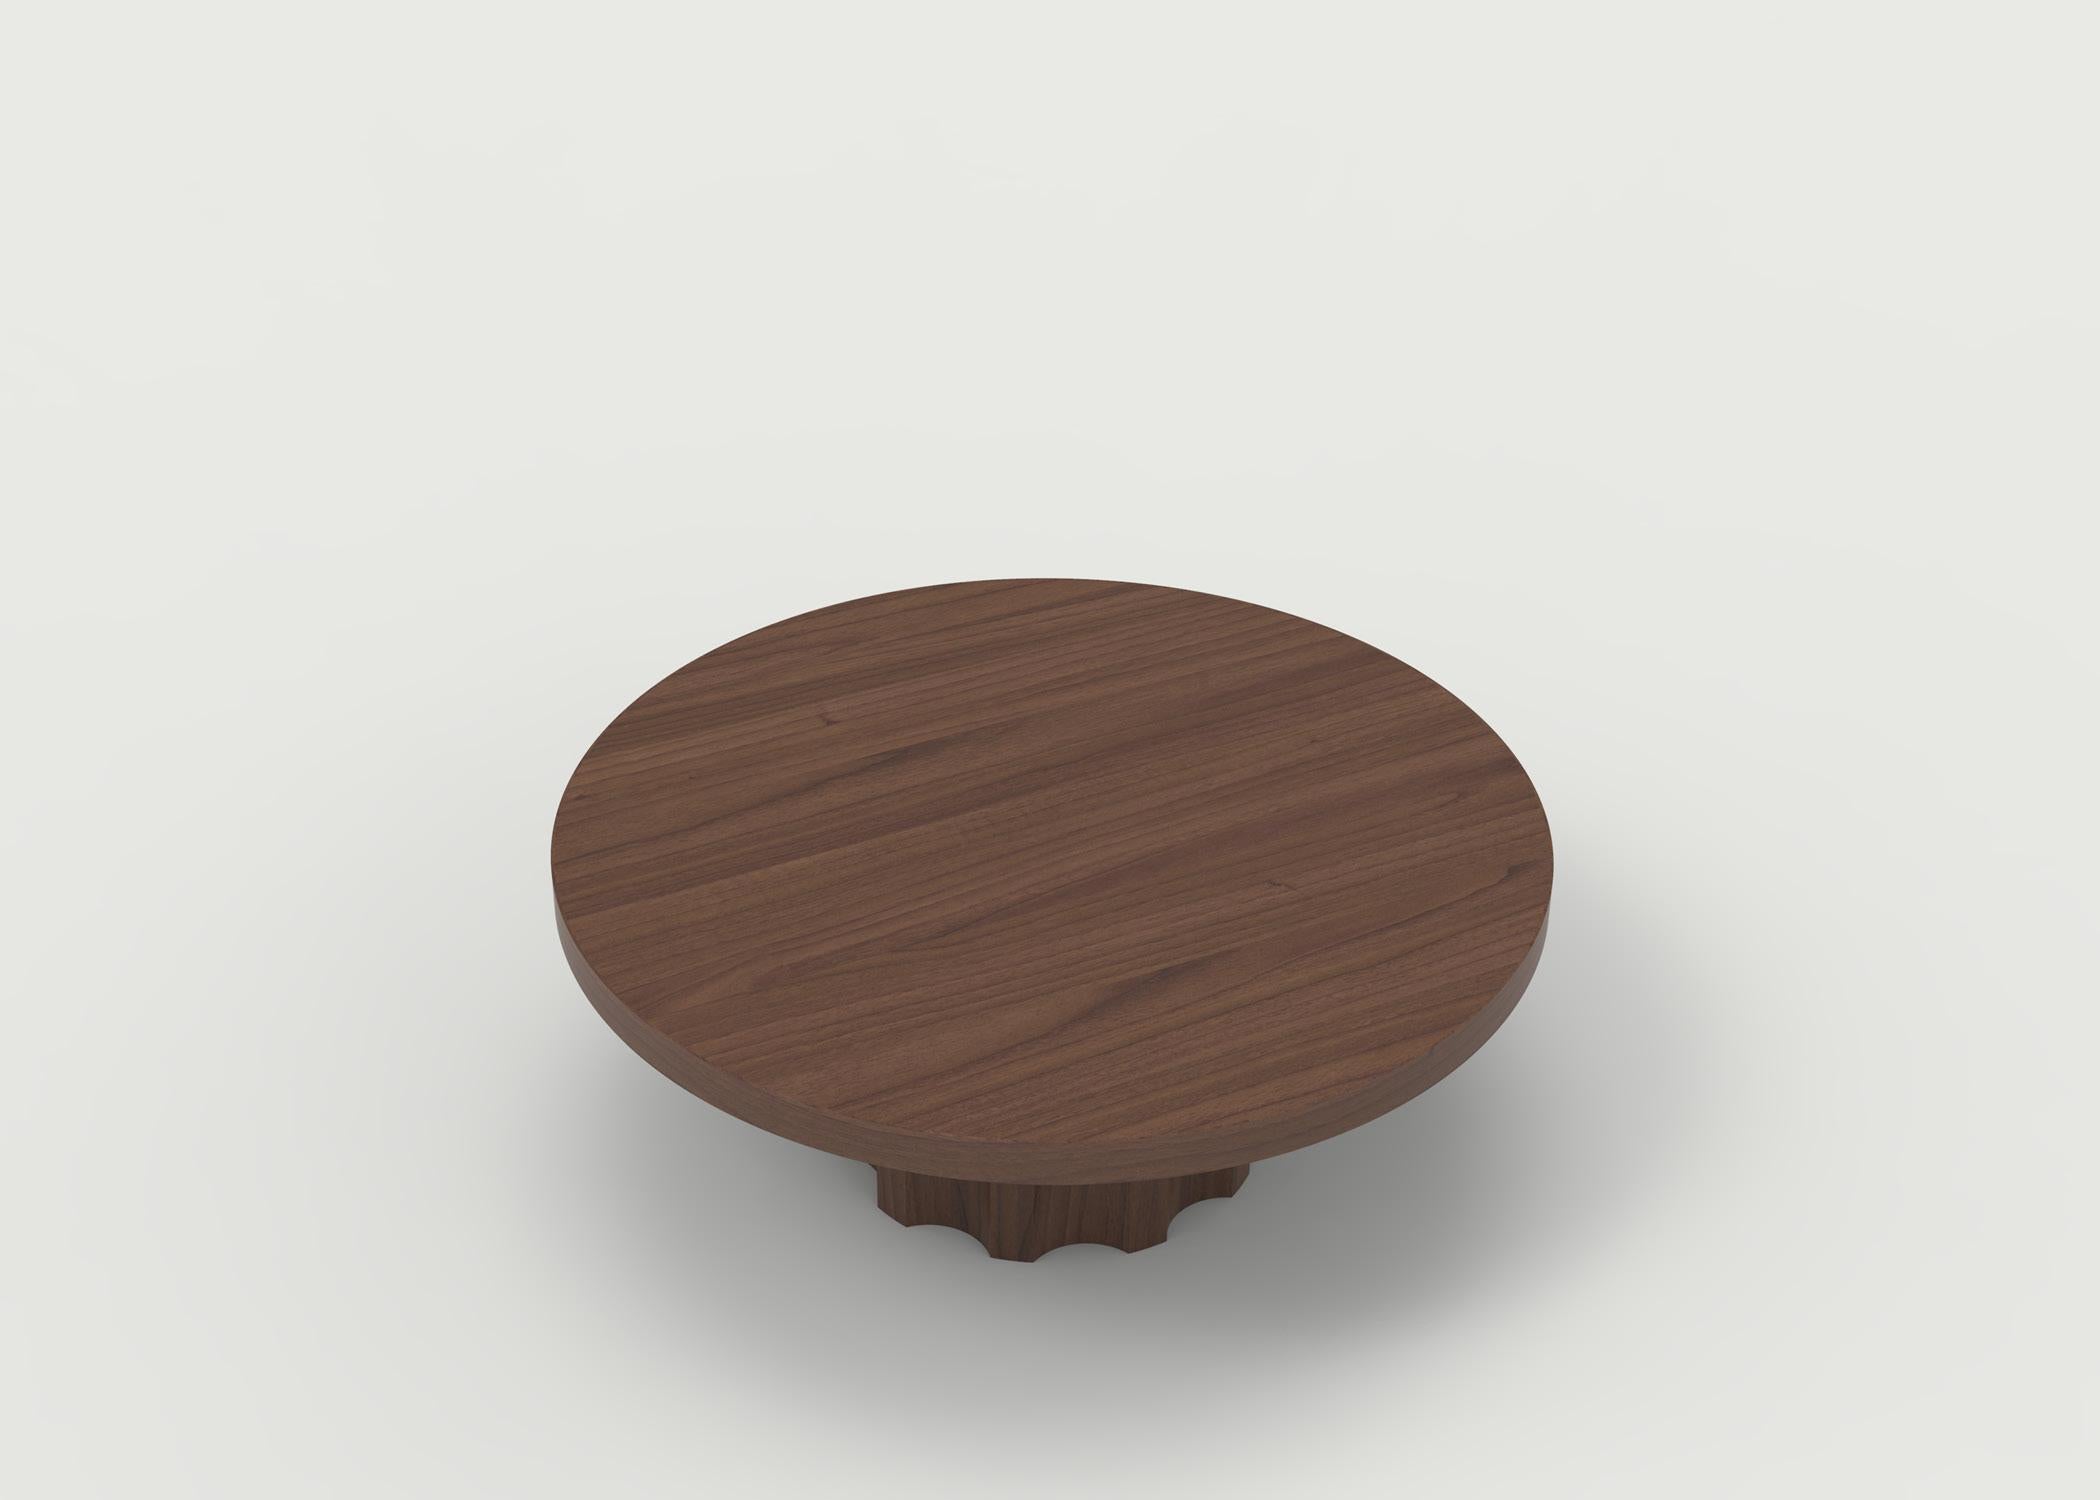 The Bayard coffee table is all hand carved with a whimsical base based on a nut and bolt. All crafted in our shop in Brooklyn with carefully selected wood and finished to your specifications. 
Price shown is for table in standard wood and finish in